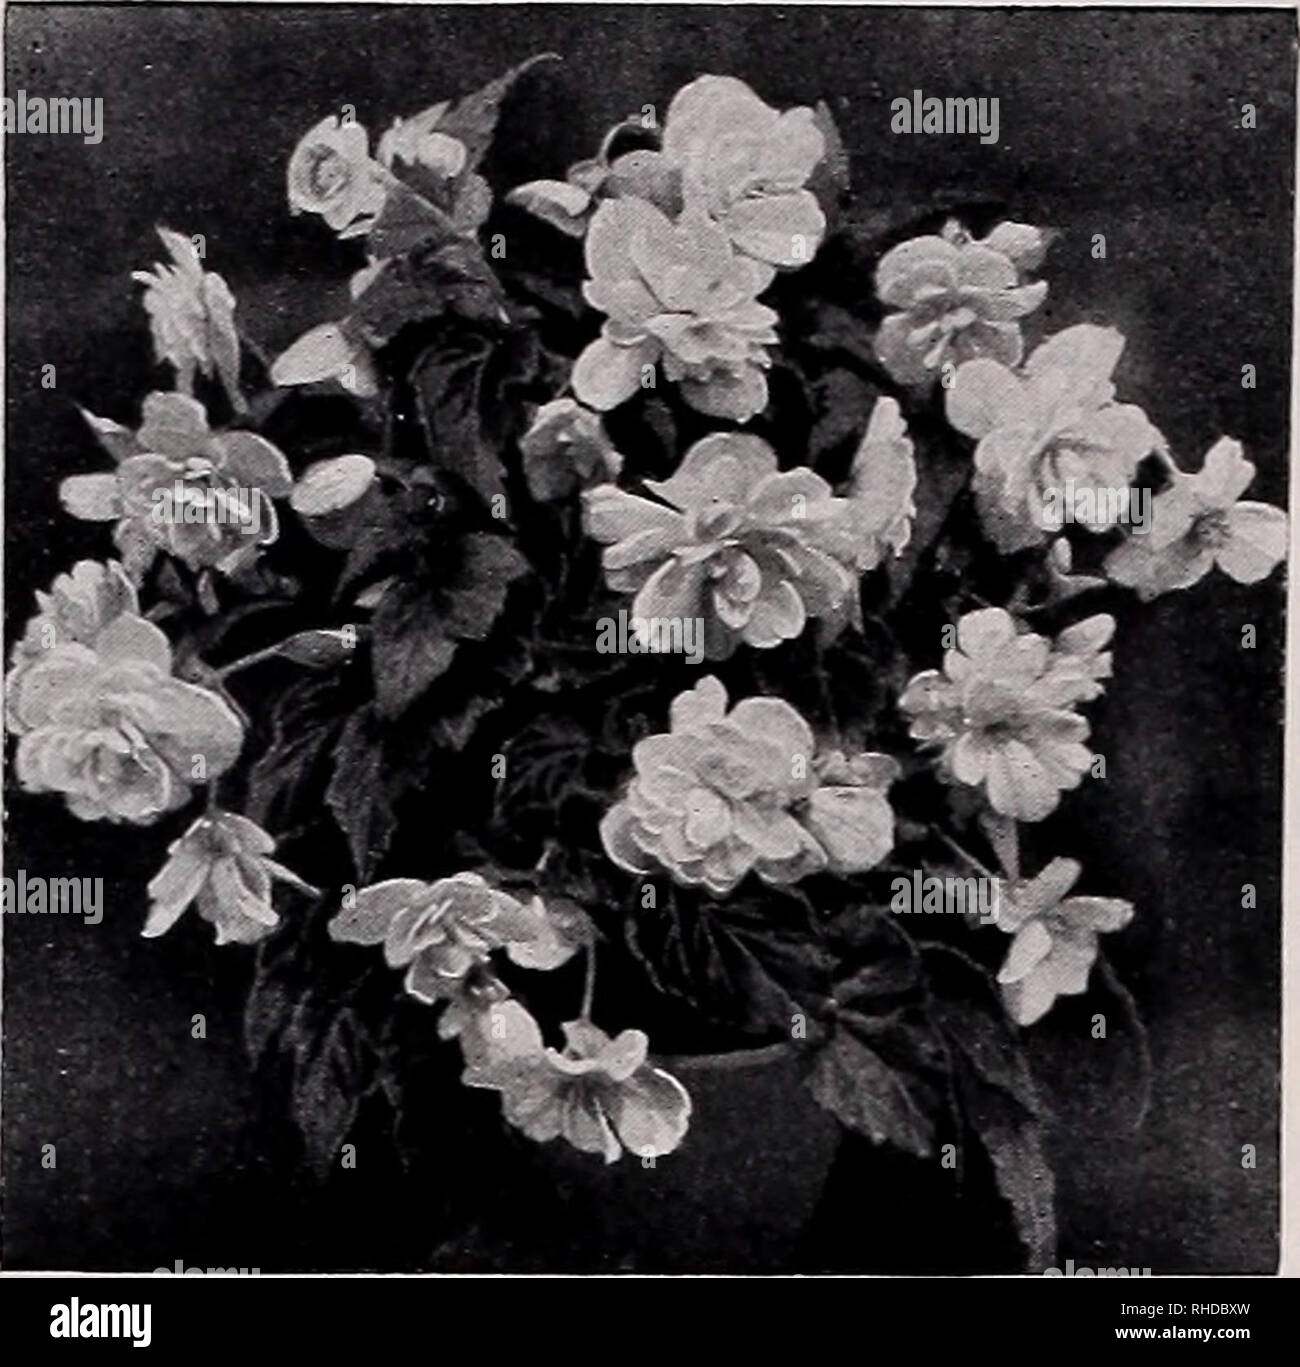 . Book for florists : spring 1938. Flowers Seeds Catalogs; Bulbs (Plants) Seedlings Catalogs; Vegetables Seeds Catalogs; Trees Seeds Catalogs; Horticulture Equipment and supplies Catalogs. Flower Seed Novelties and Specialties. BEGONIA SEMPERFLORENS HETEROSIS ESSEN 1938 BEGONIA MULTIFLORA FL. PL. MRS. HELEN HARMS CAMPANULA COLLINA See Page 5 ASTER Wilt Resistant Giant Comet Illusion. A soft pastel shade of apricot pink, especially fine for cutting and most effective when used in combination with some blue flower, such as Cyno- glossum (Chinese Forget-Me-Not). Plants are two feet tall, up- righ Stock Photo